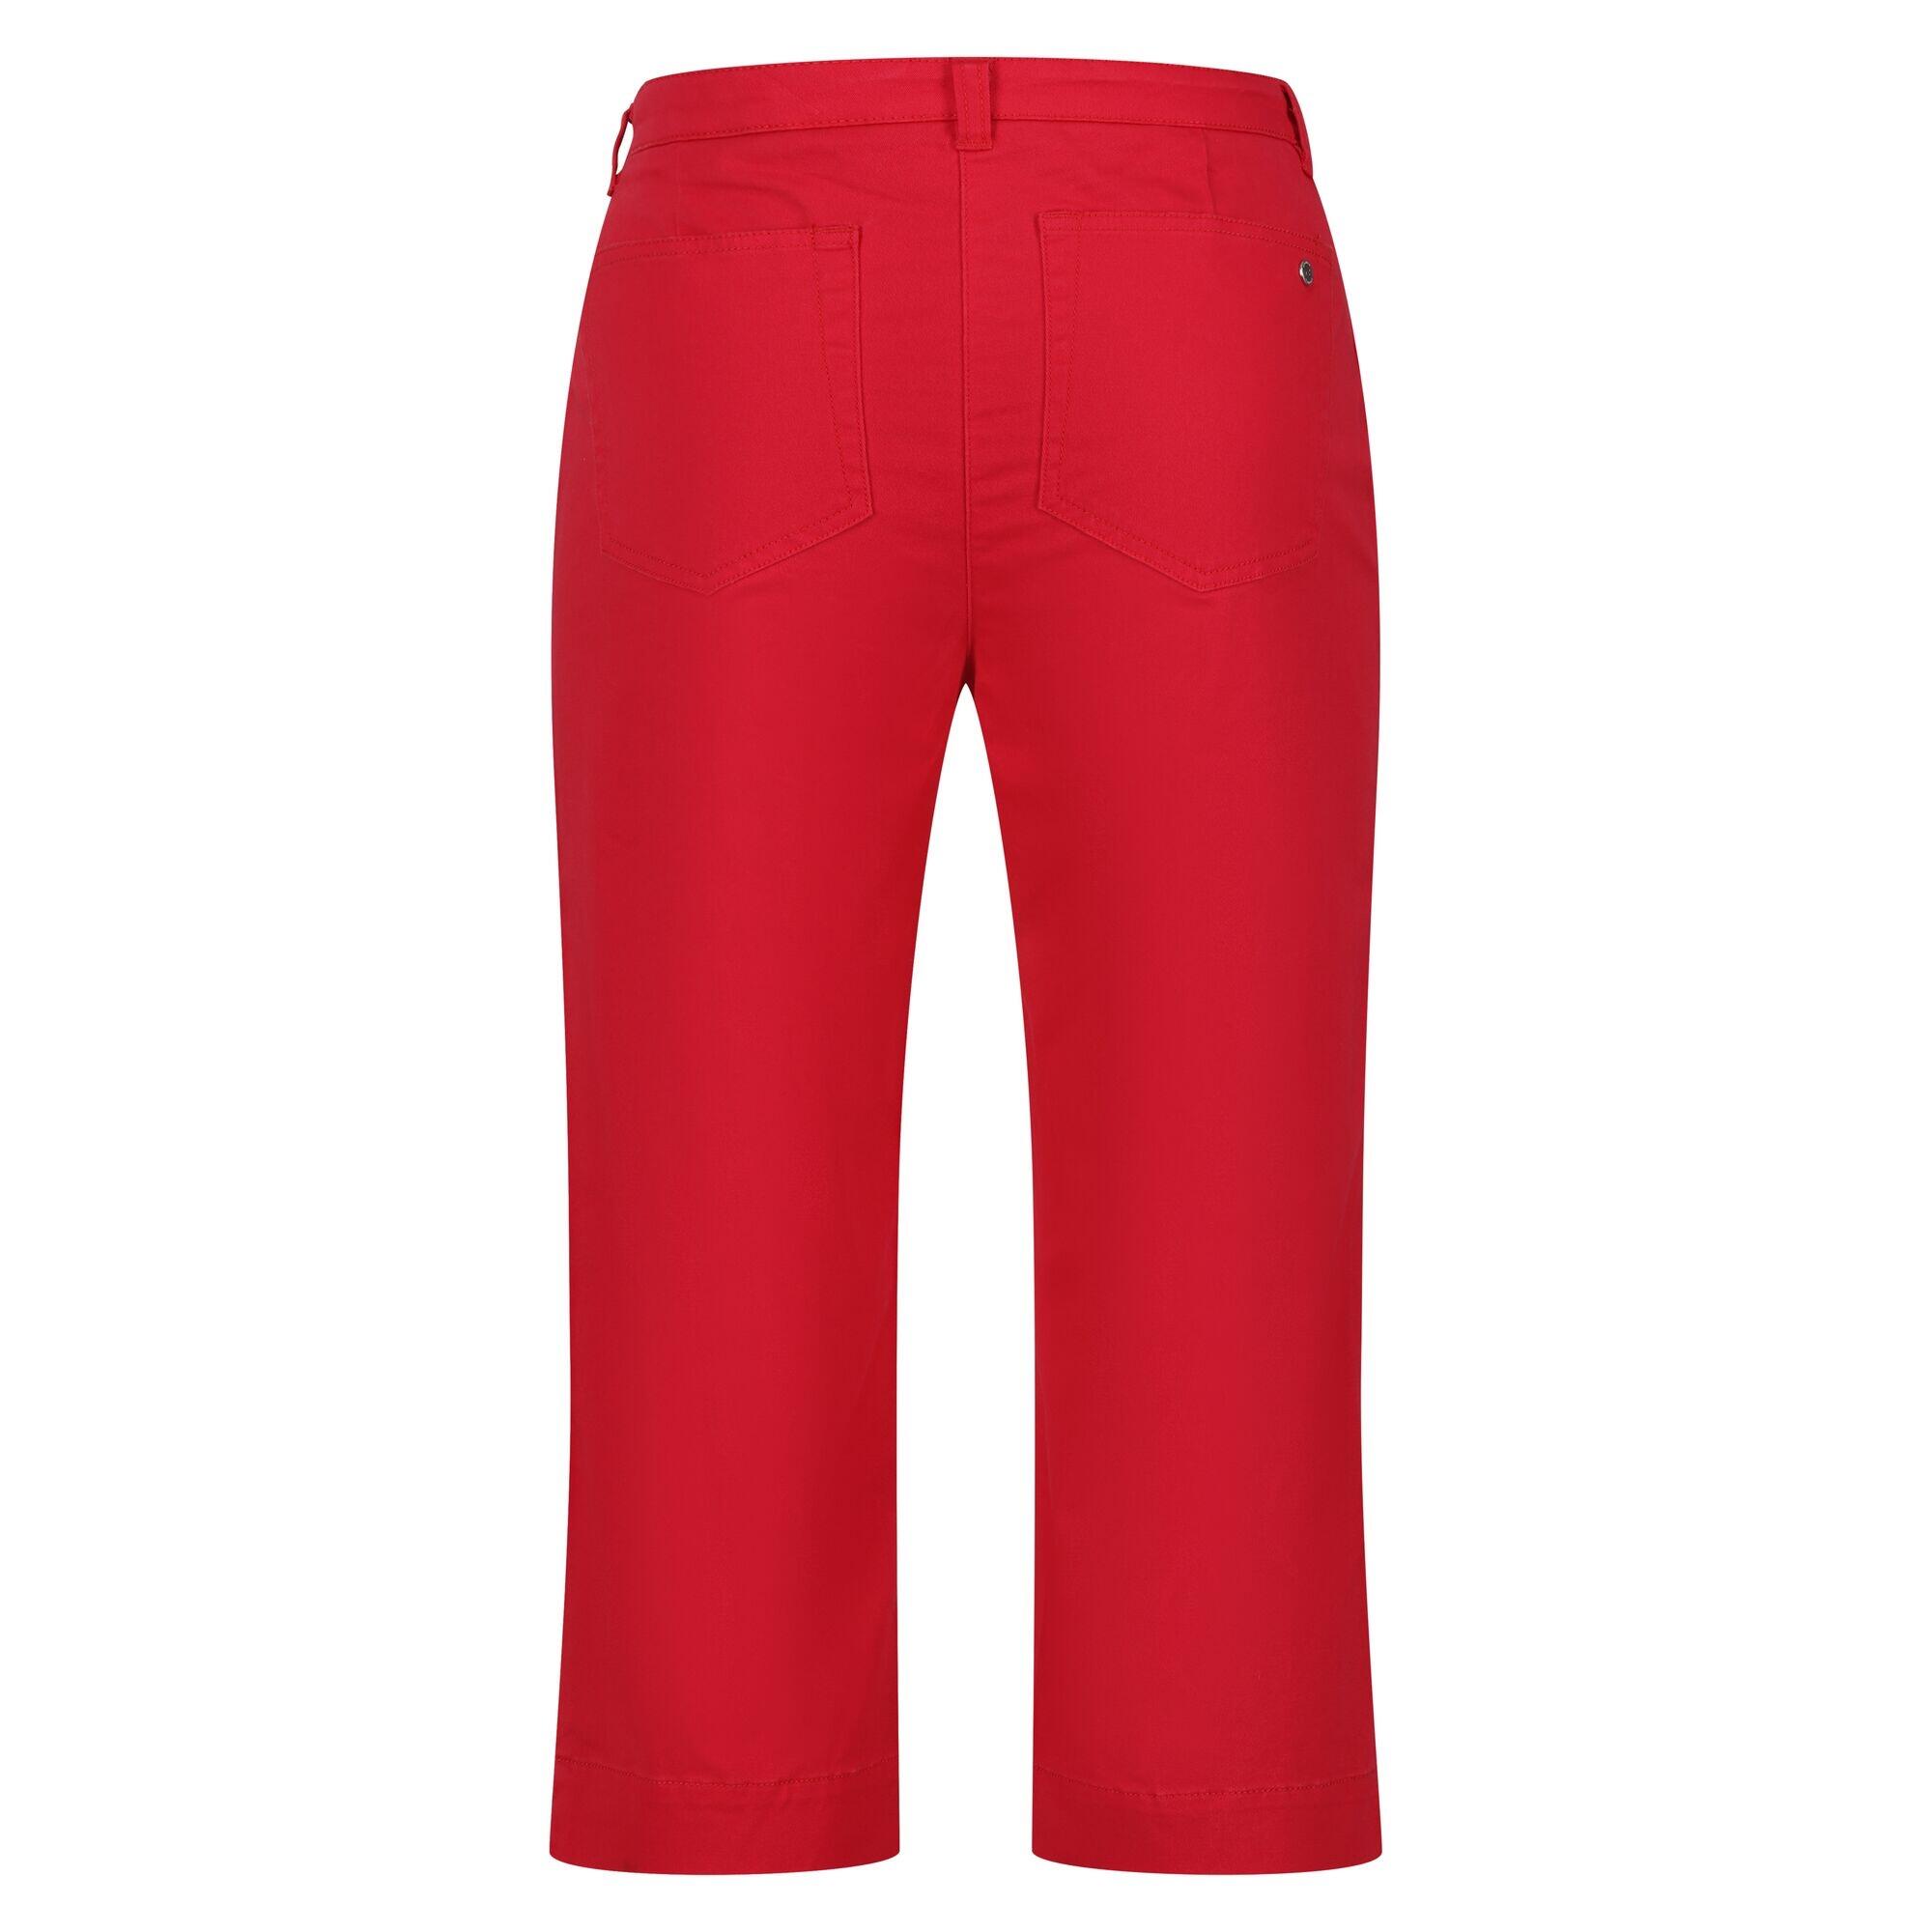 Womens/Ladies Bayla Cropped Trousers (Miami Red) 2/5